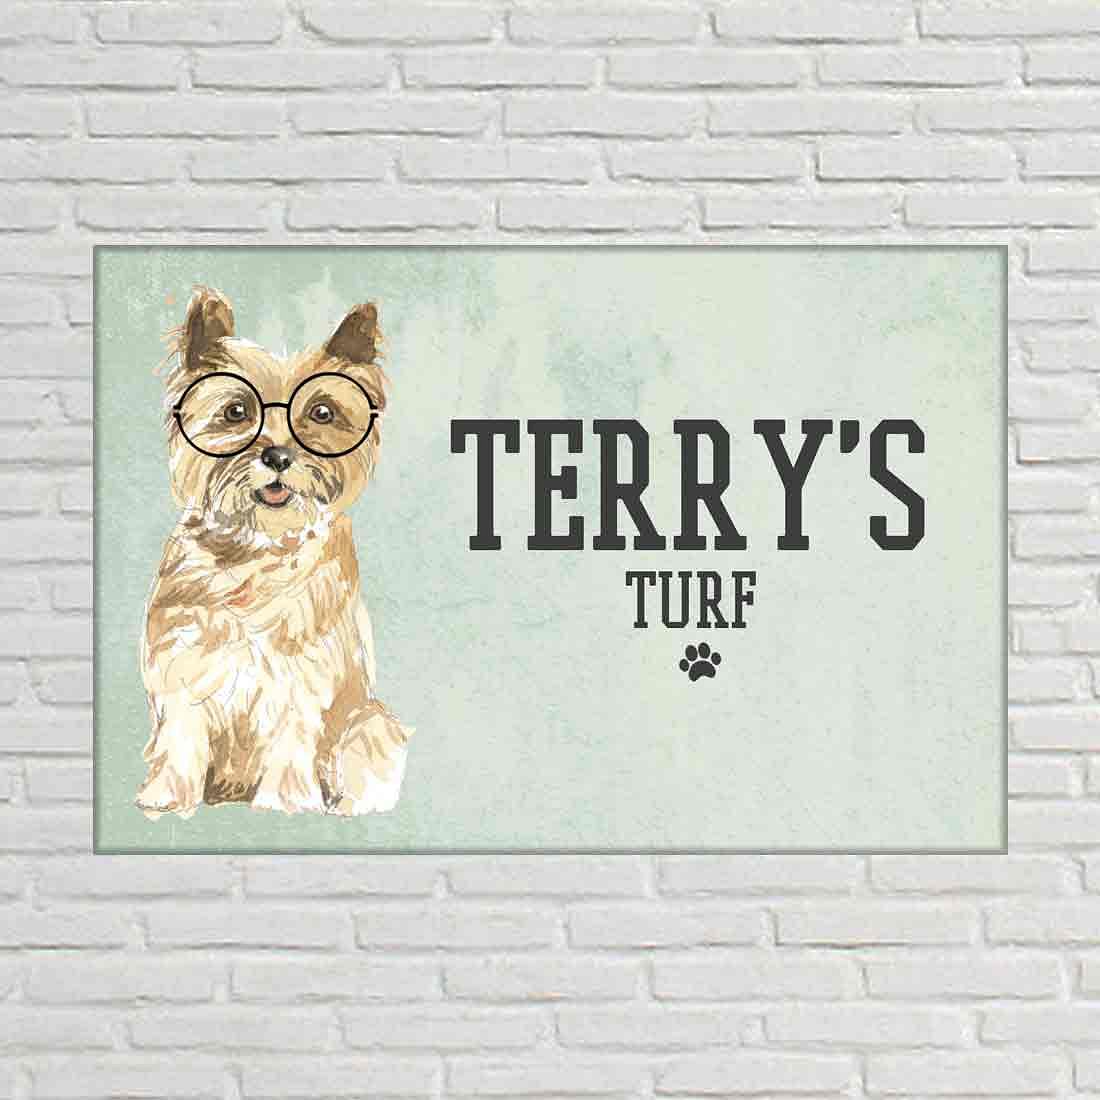 New Classy Dog Name Plate -Yorkshire Terrier Nutcase